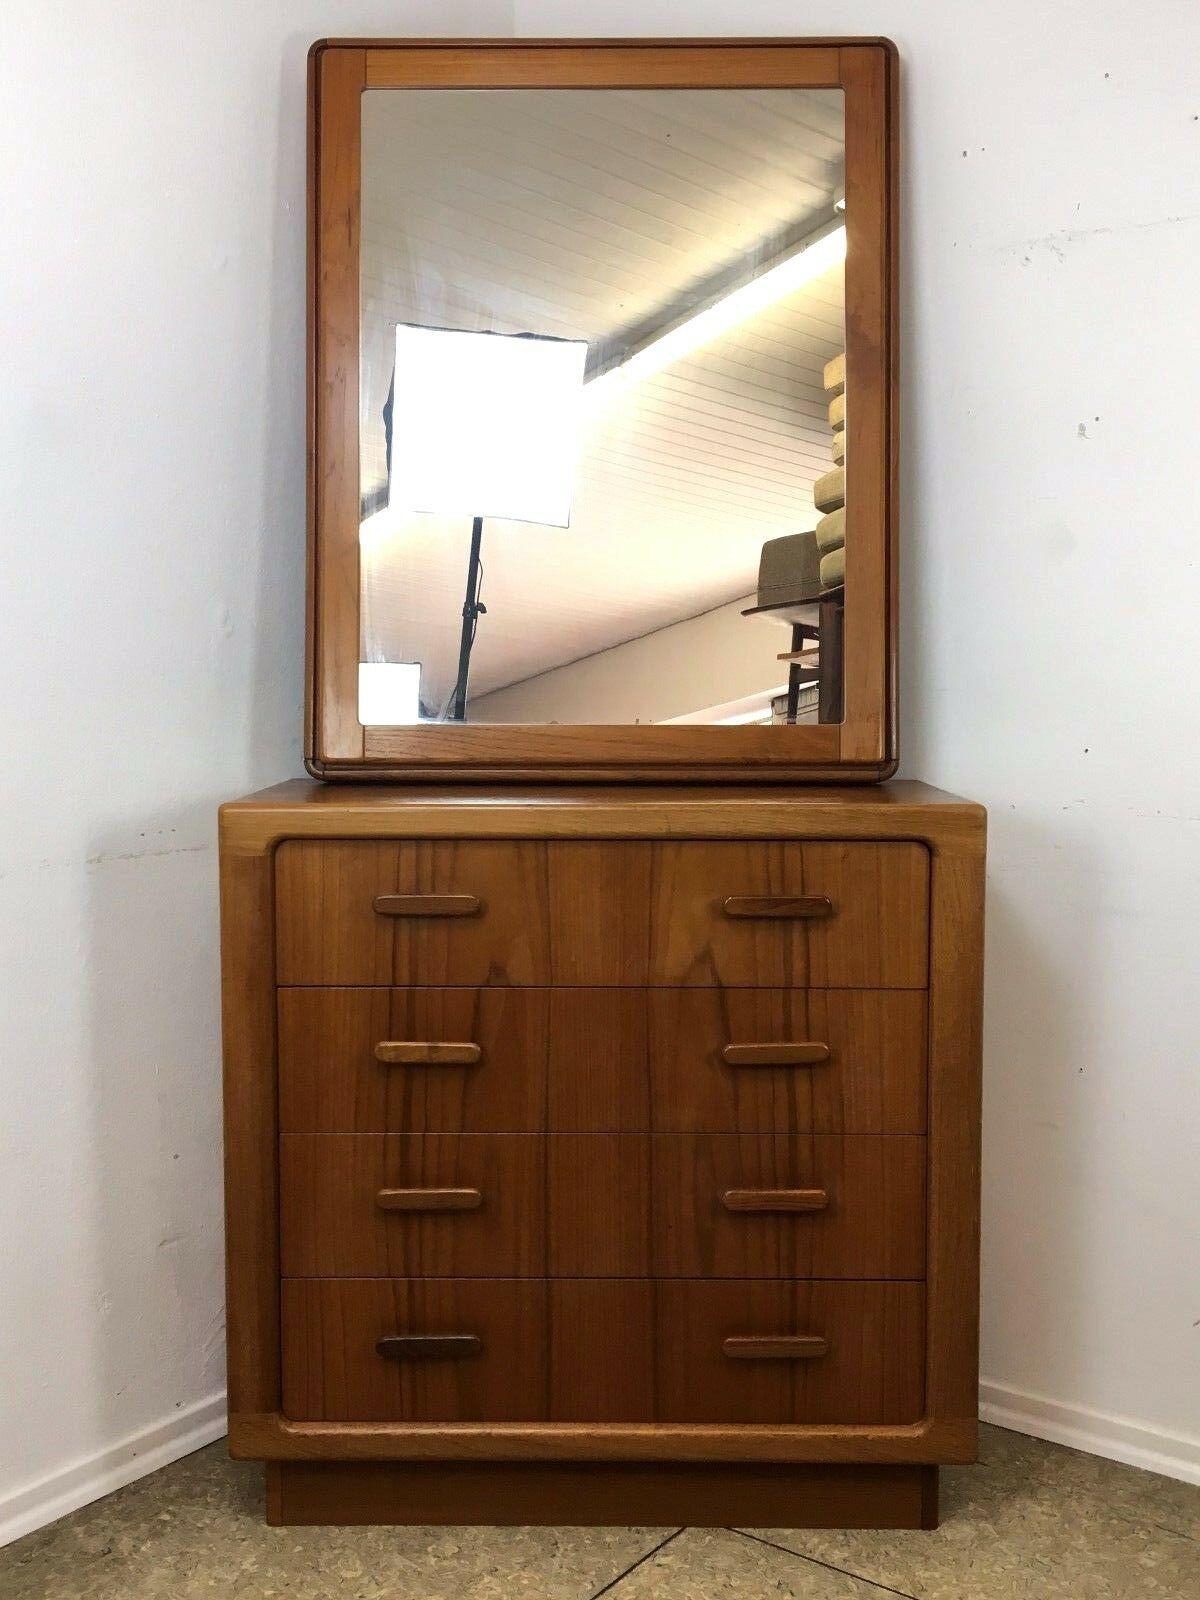 60s 70s teak sideboard dresser Danish Design mid century Denmark 60s 70s

Object: chest of drawers & mirror

Manufacturer:

Condition: good

Age: around 1960-1970

Dimensions:

93cm x 74cm x 7cm
84cm x 38cm x 83cm

Other notes:

The